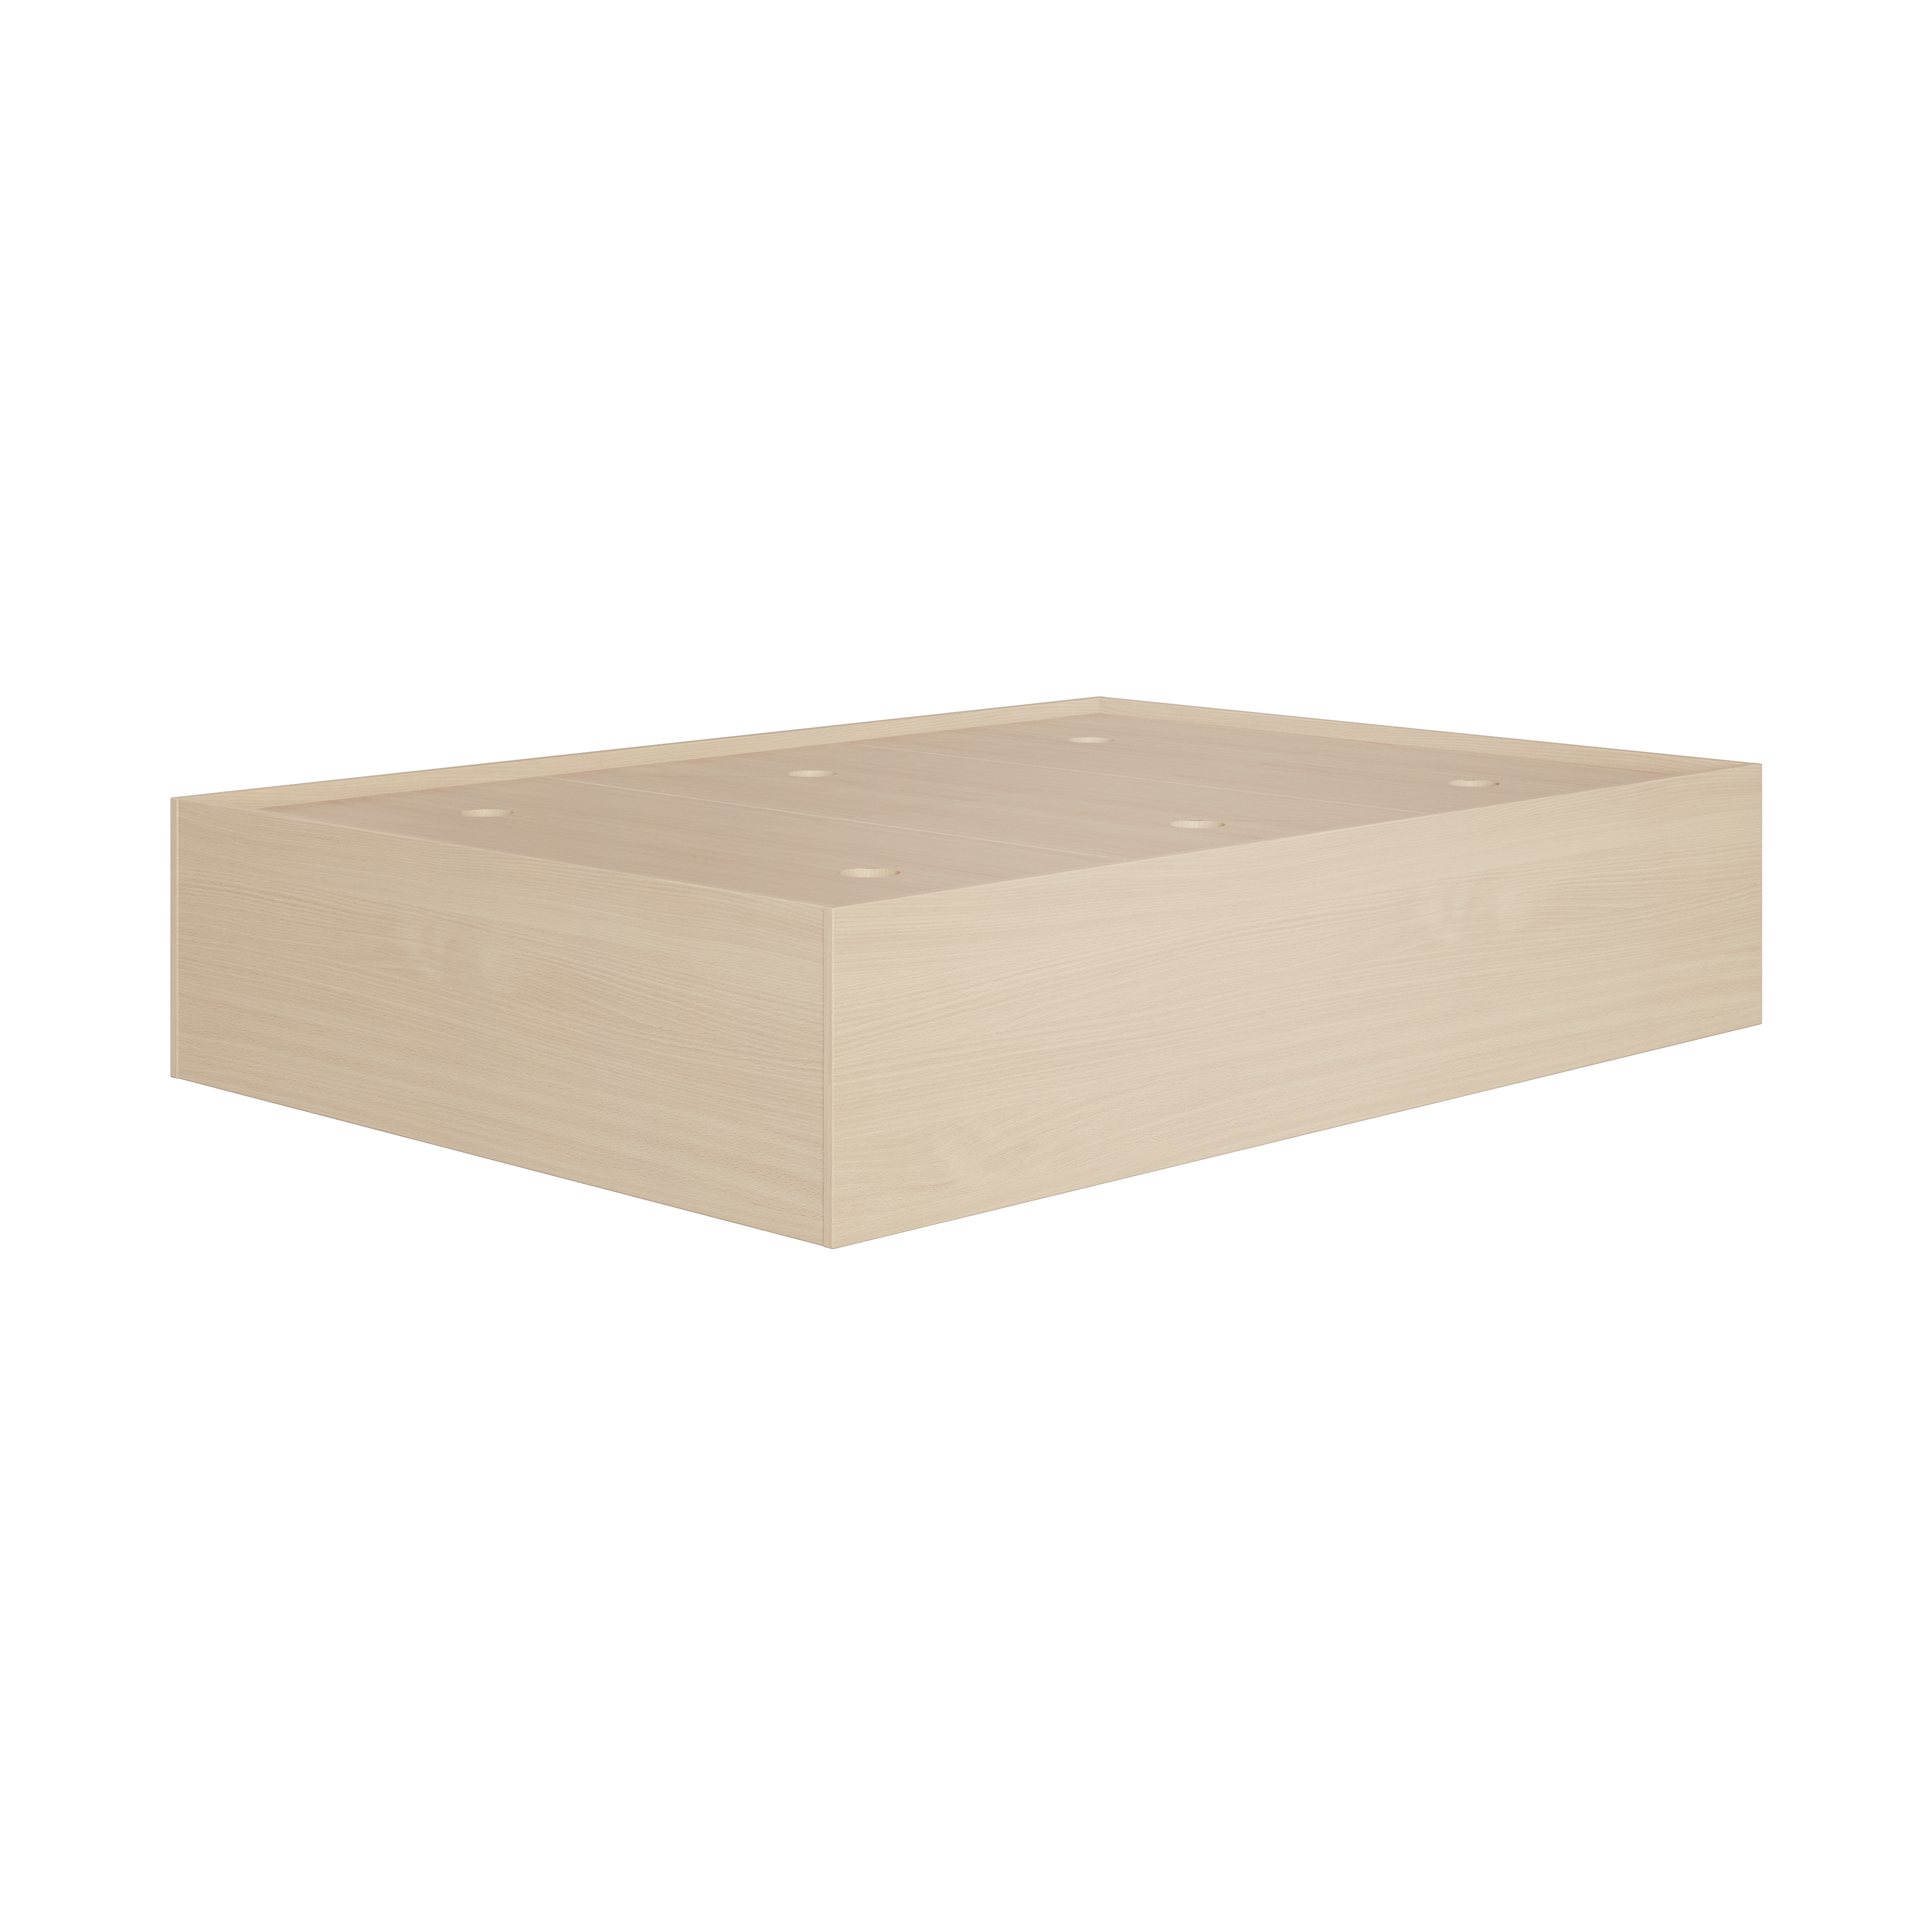 Box Bed - Wooden - Double (Flat packed)